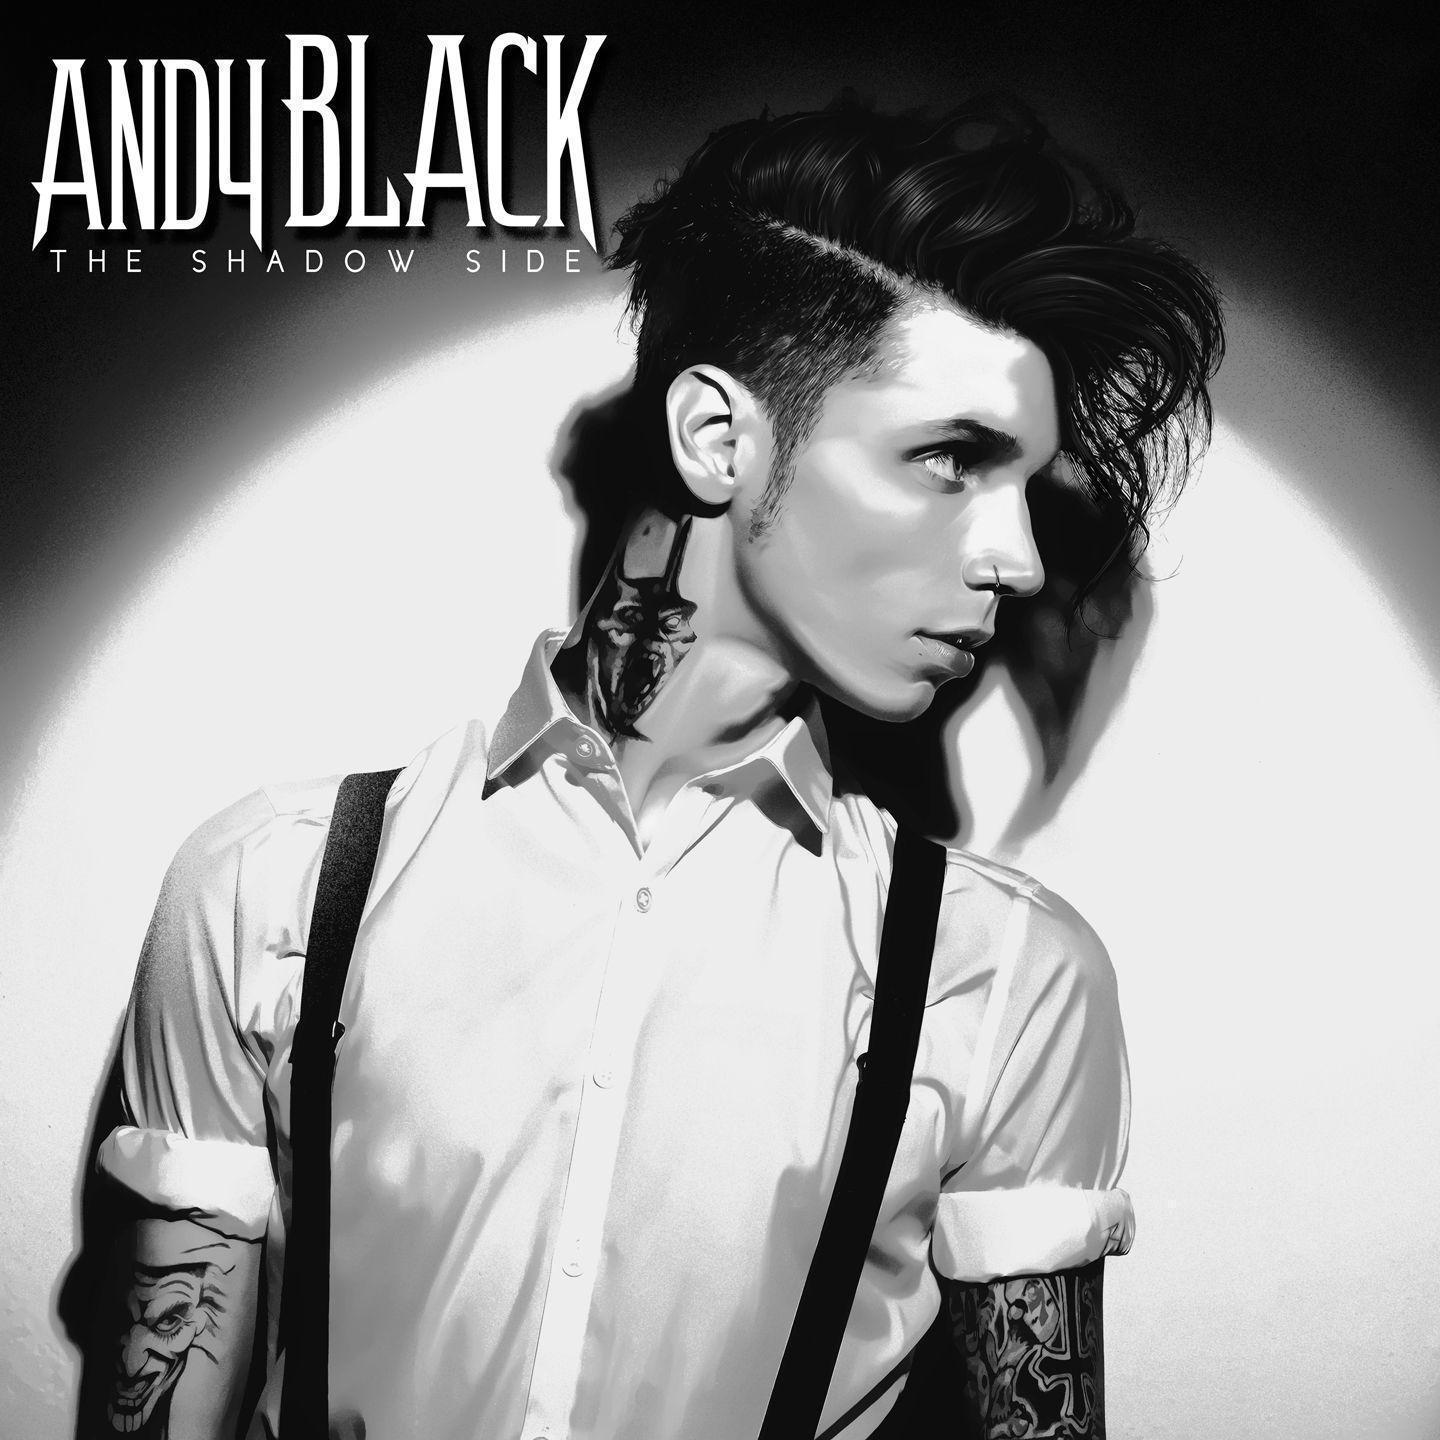 Andy Black Of Black Veil Brides Releases Debut Solo Single “We Don